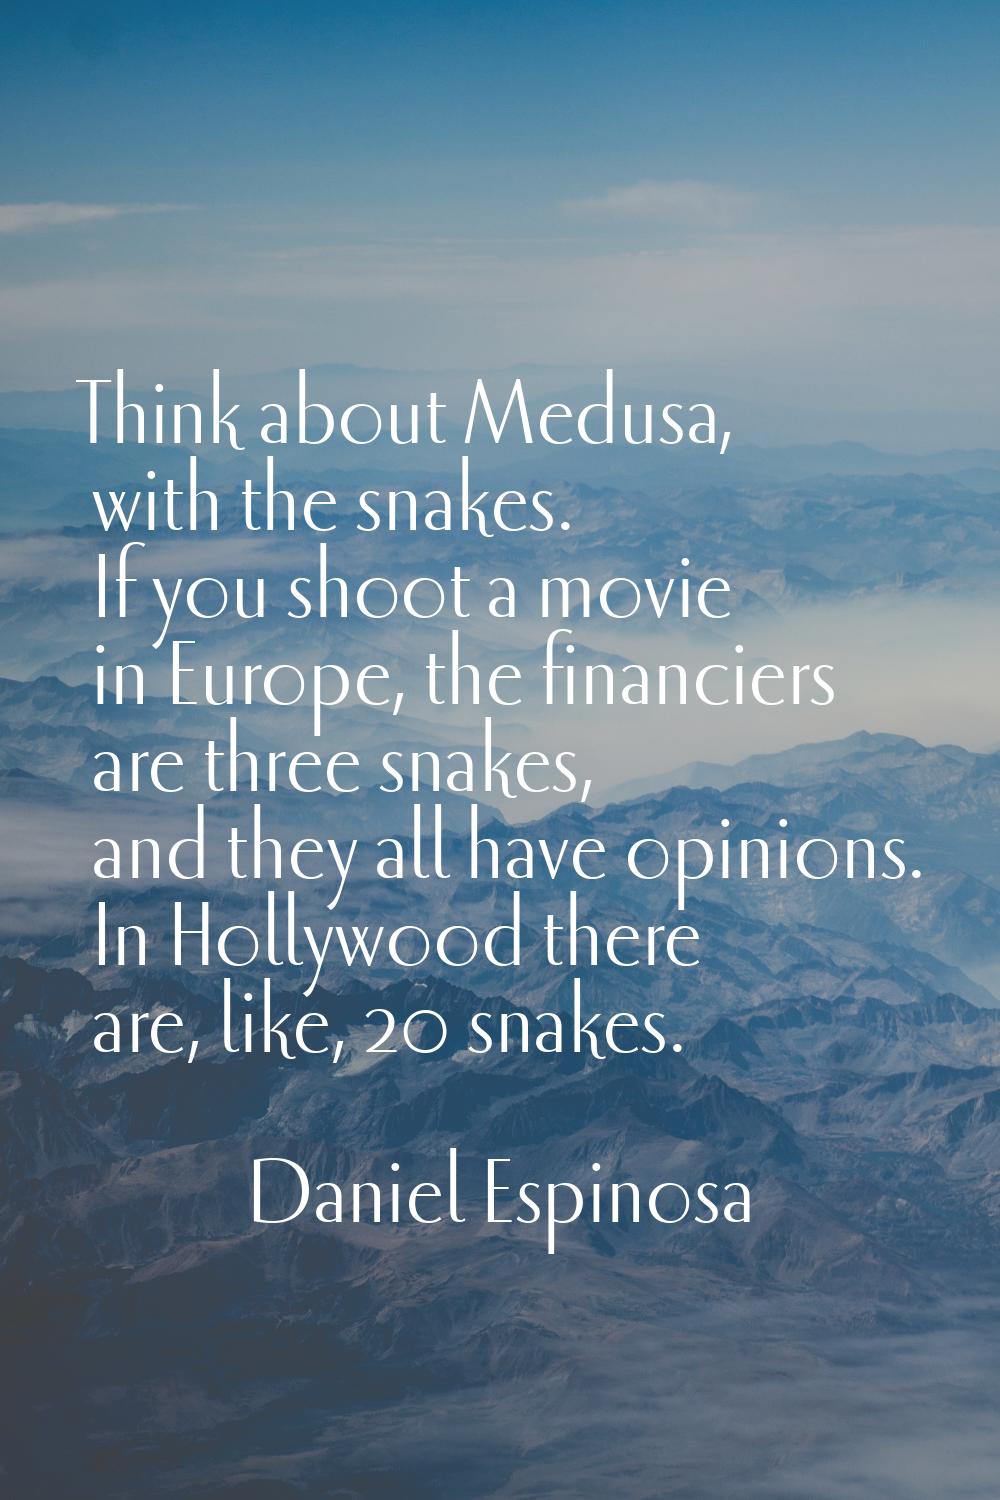 Think about Medusa, with the snakes. If you shoot a movie in Europe, the financiers are three snake